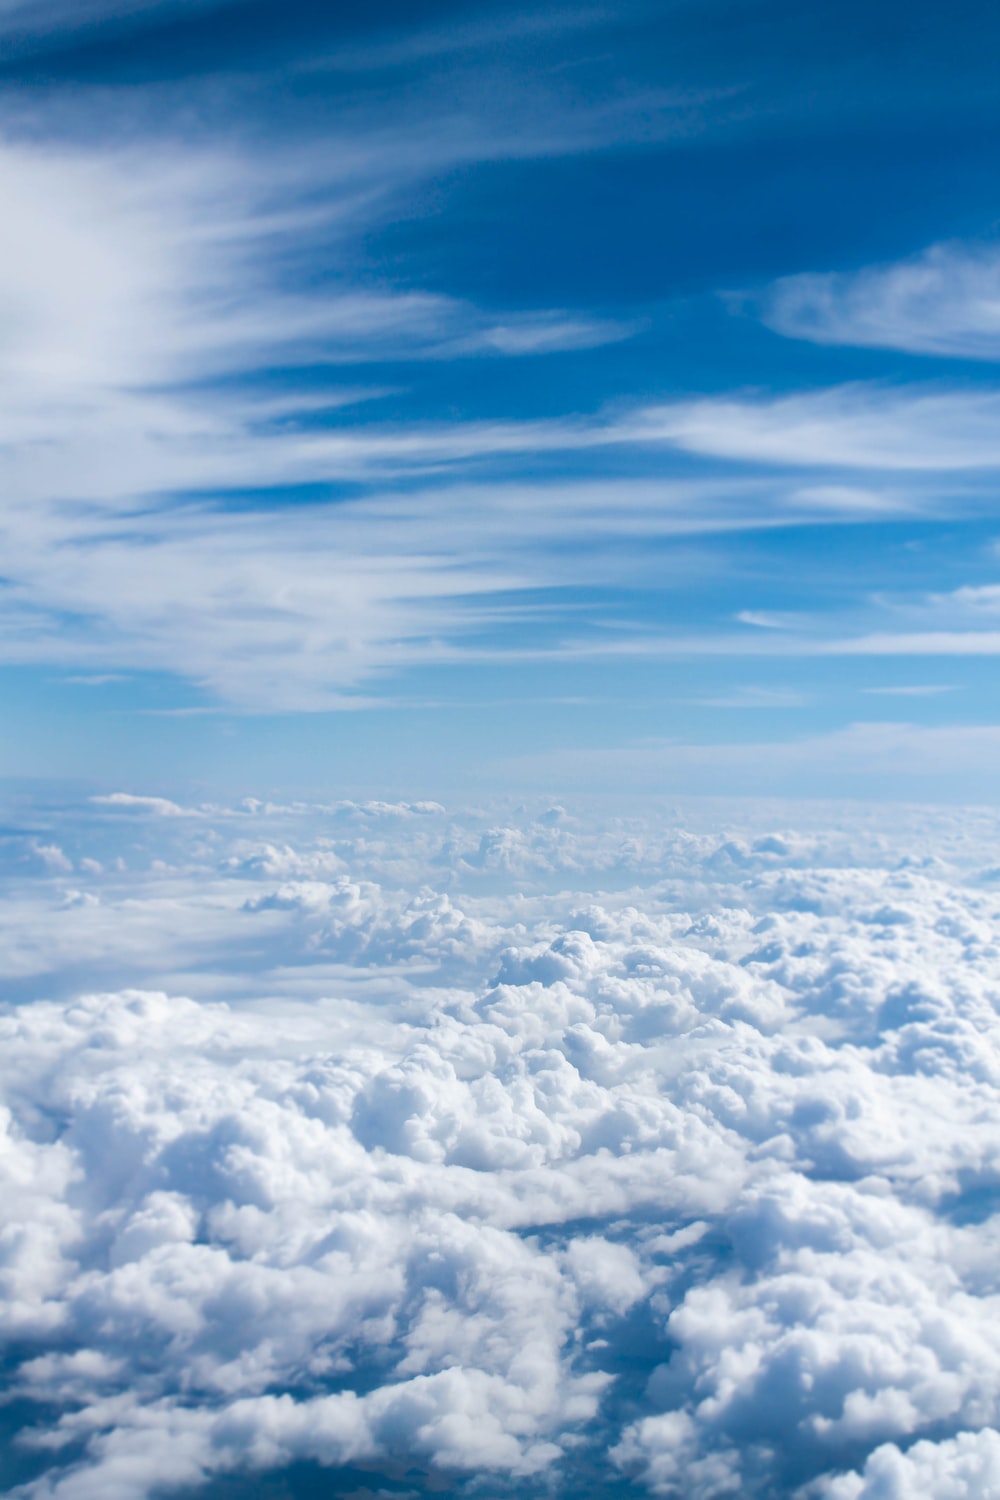 Plane Clouds Sky Picture [HQ]. Download Free Image